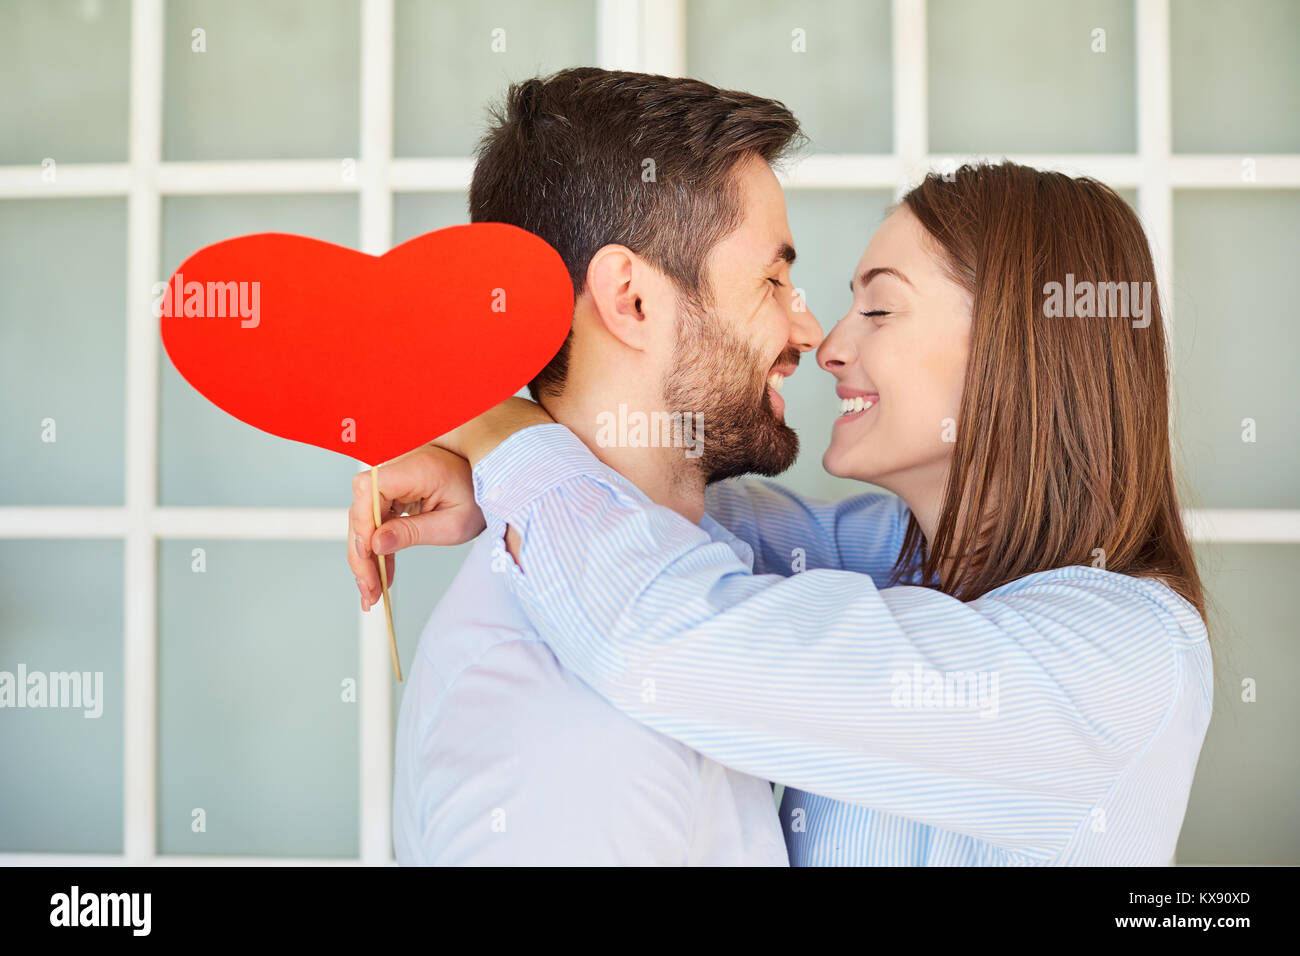 A loving couple with a red heart laugh. Stock Photo